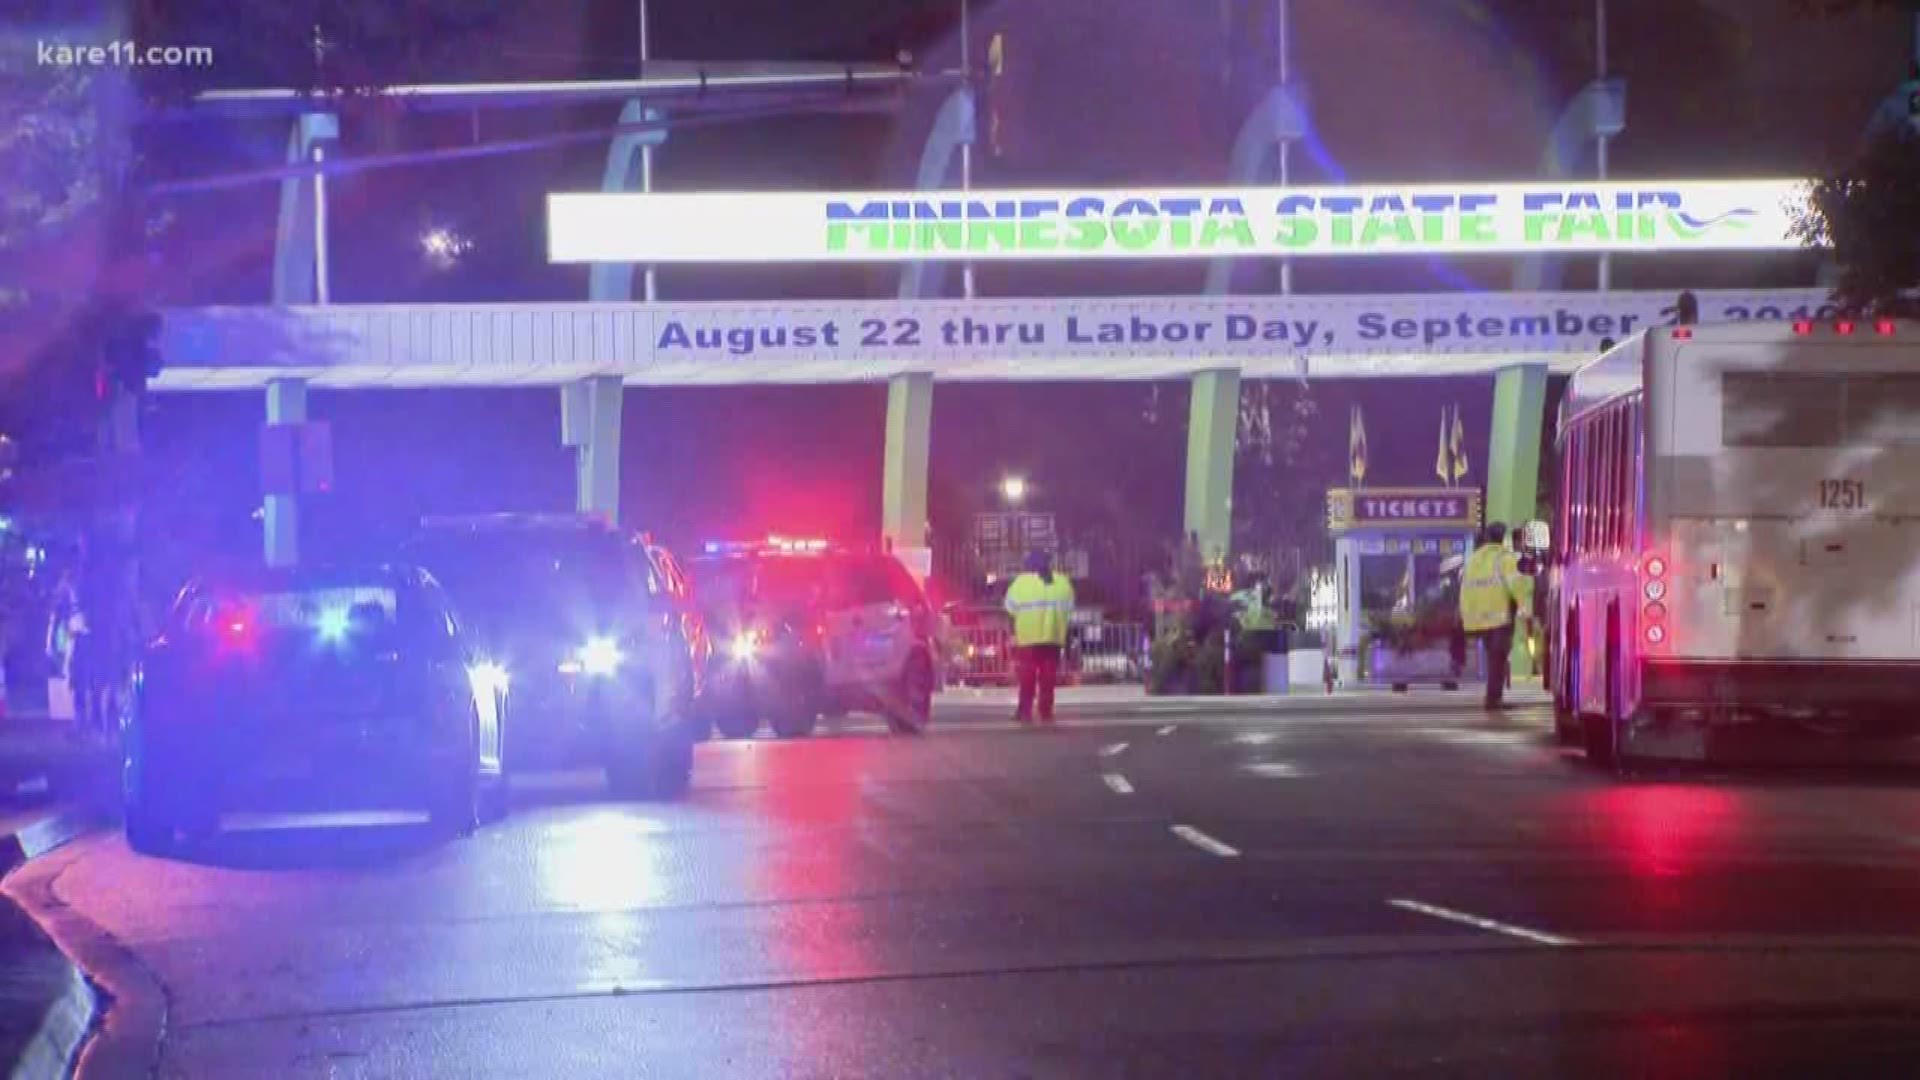 A woman was hit by a car, and three people were shot near the fairgrounds entrance on Monday night.